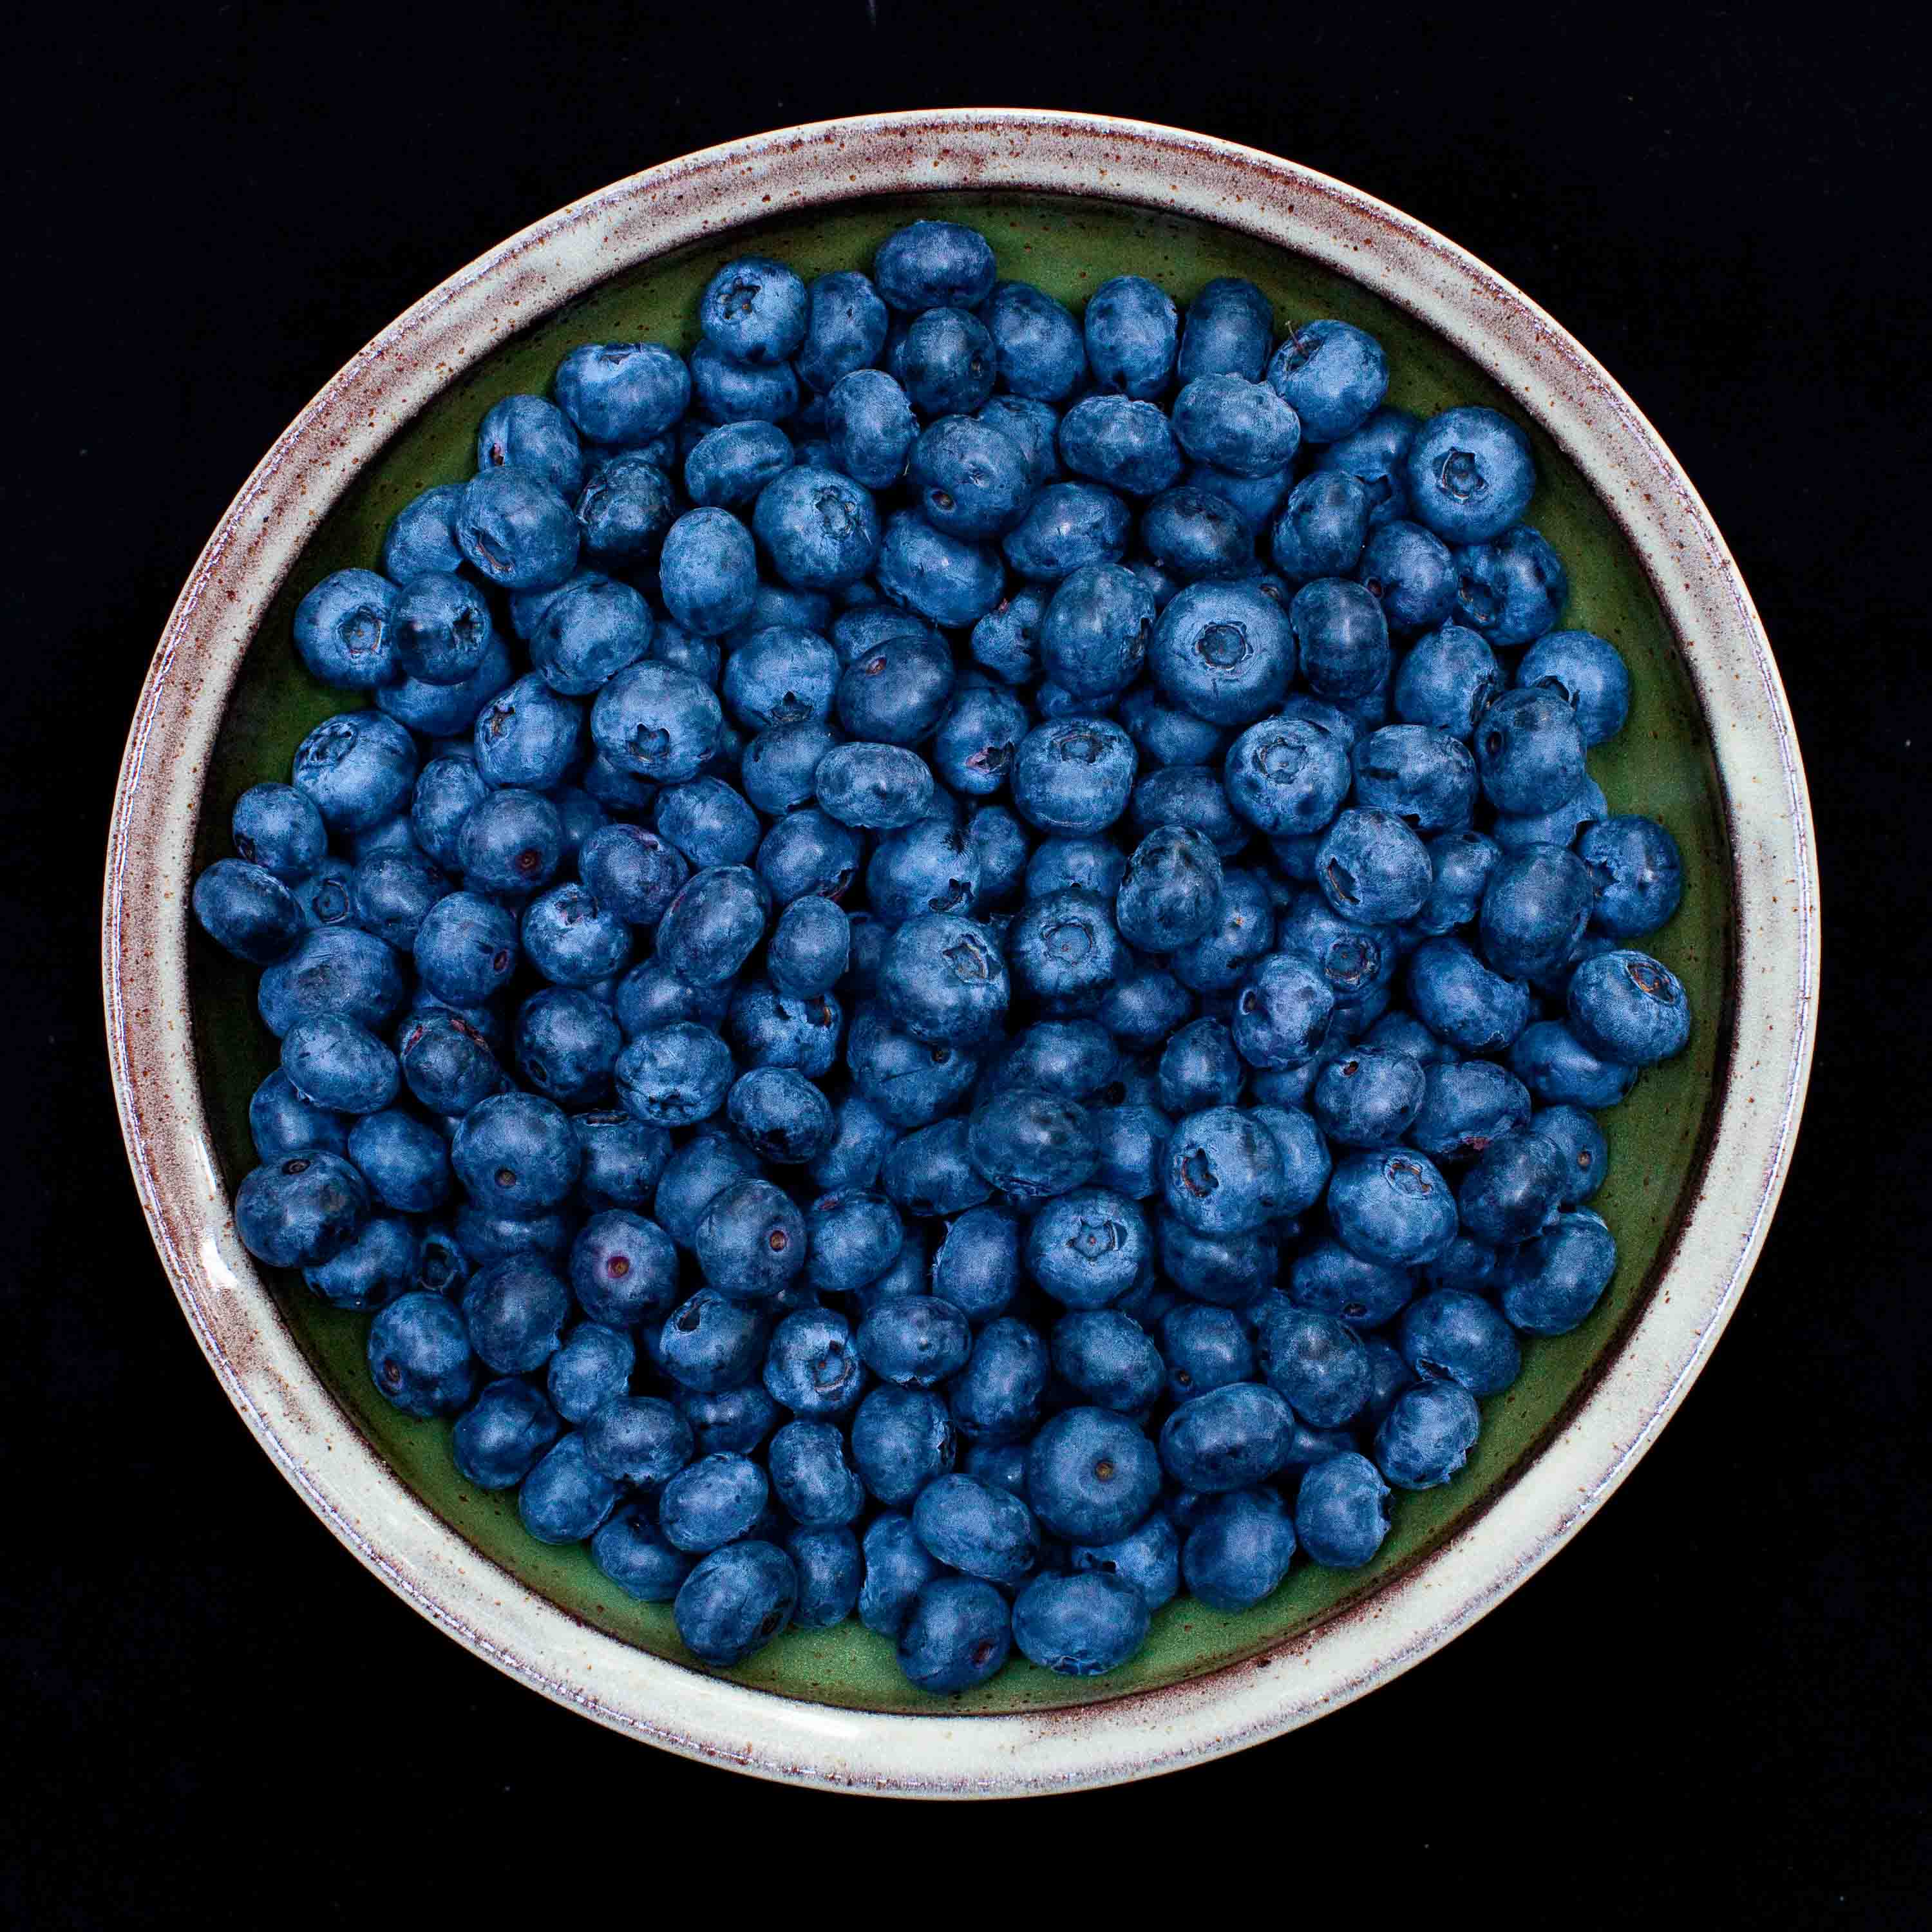 Artful  still life close up photography of natural foods | Seattle photographers